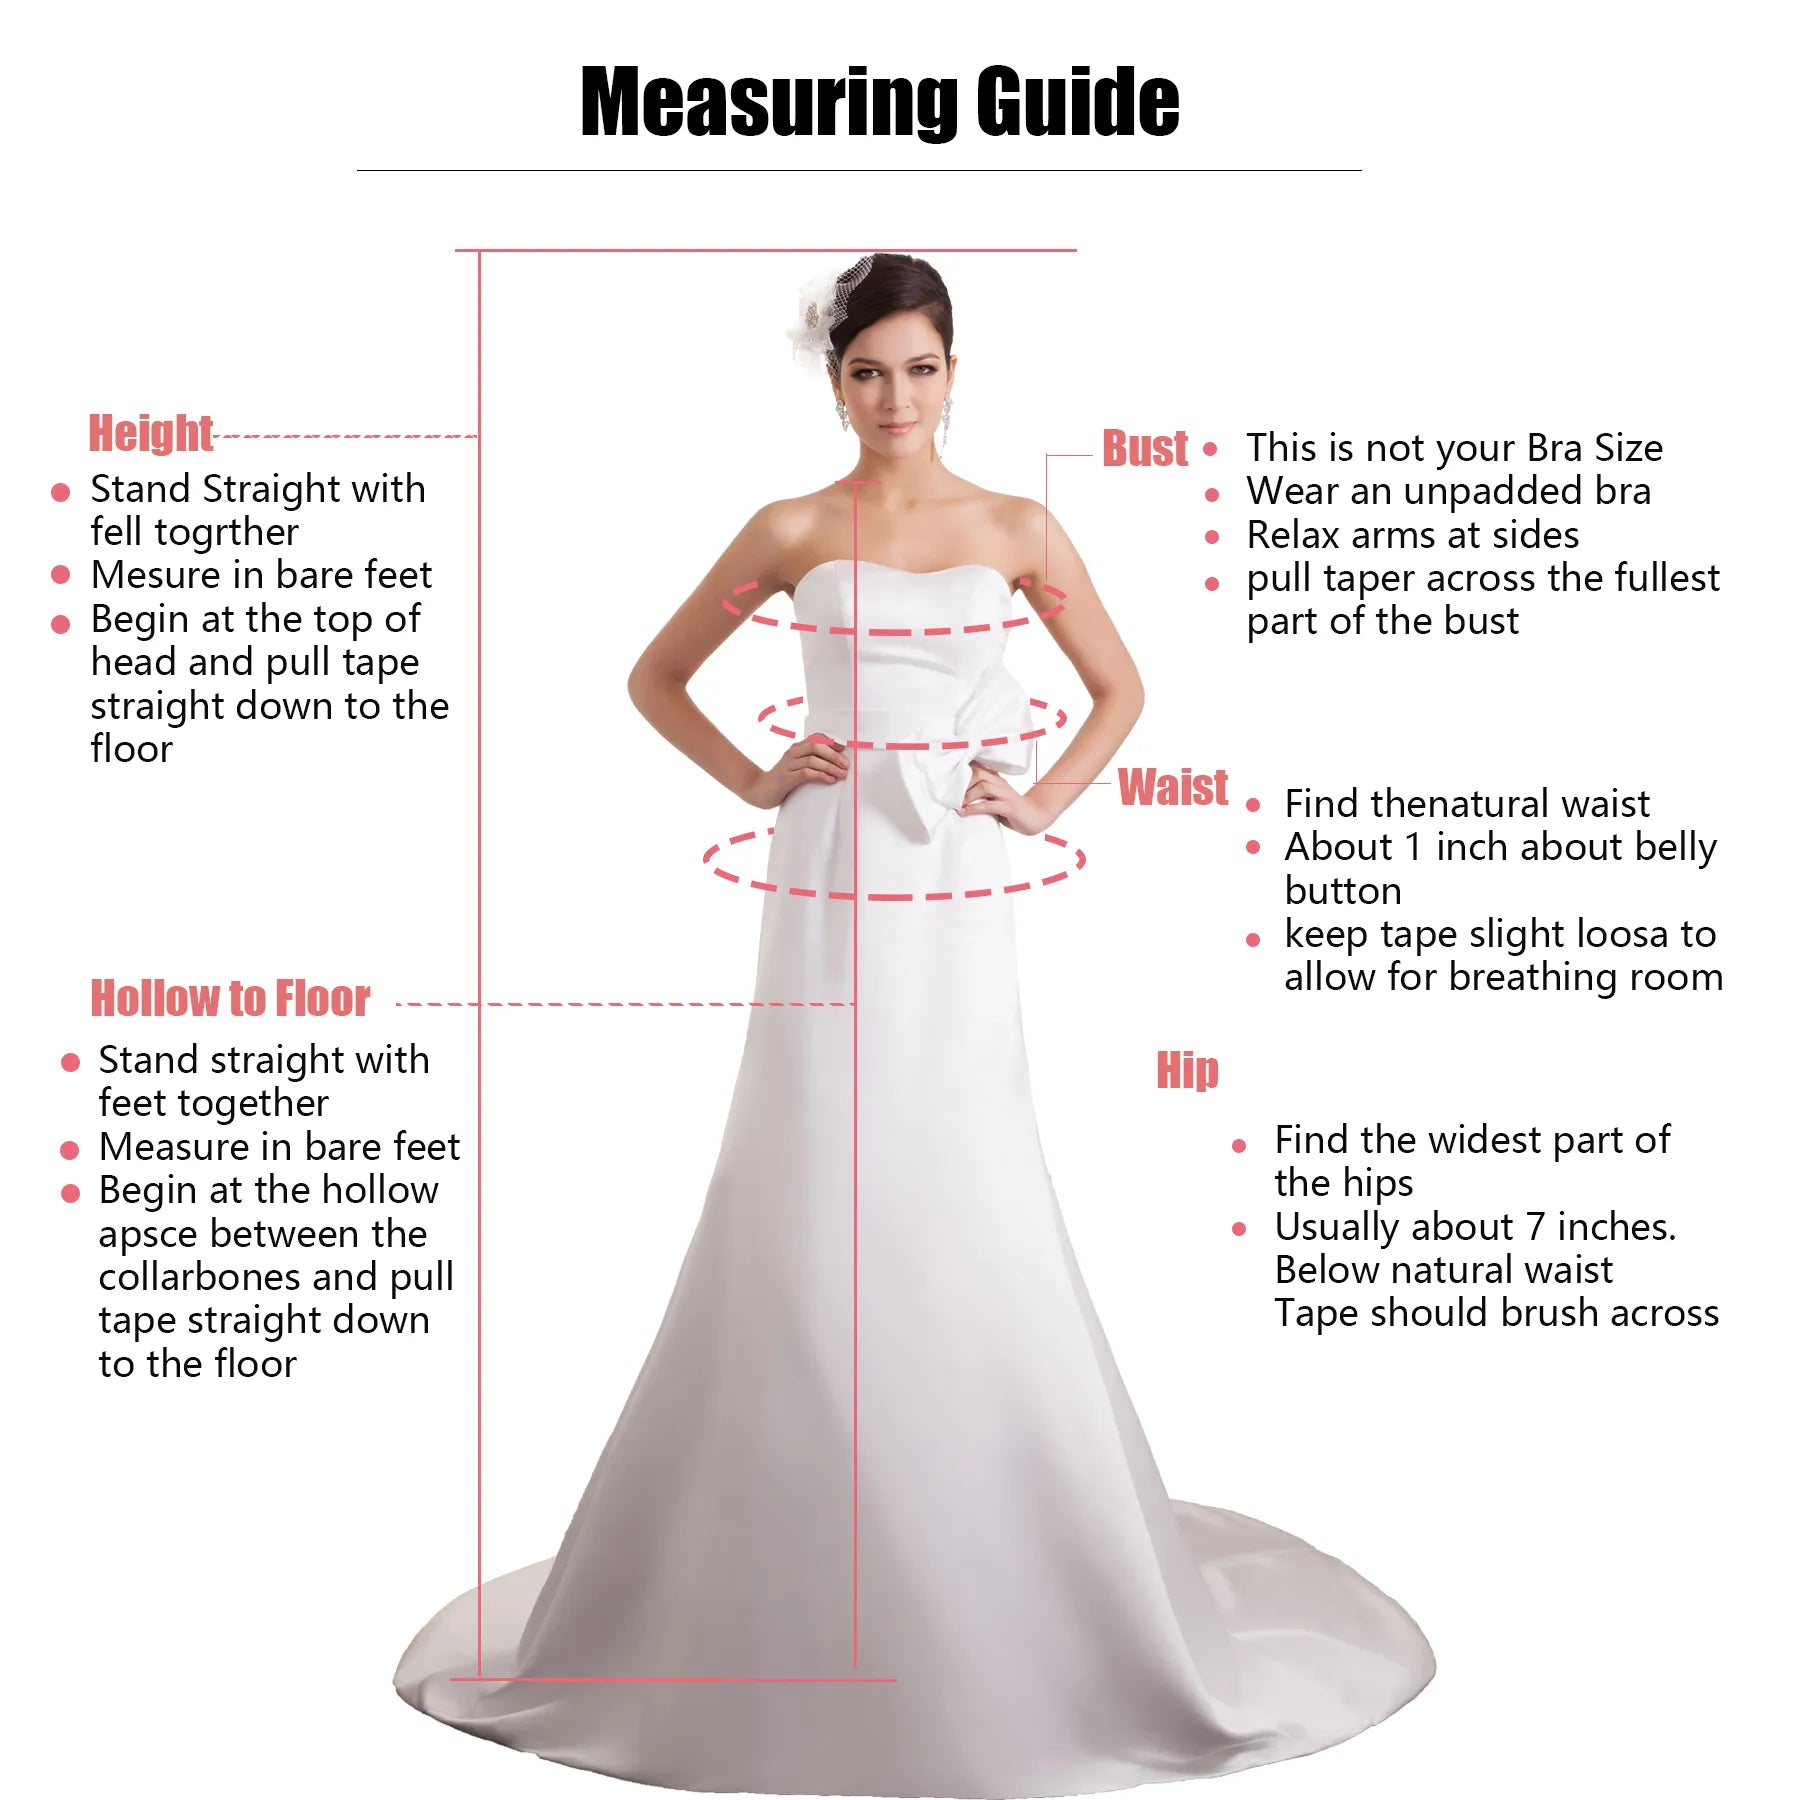 Vintage Women's Elegant Bridal Dresses Sexy Off the Shoulder Sleeveless Lace Applique Mermaid Princess Wedding Gown Formal Party